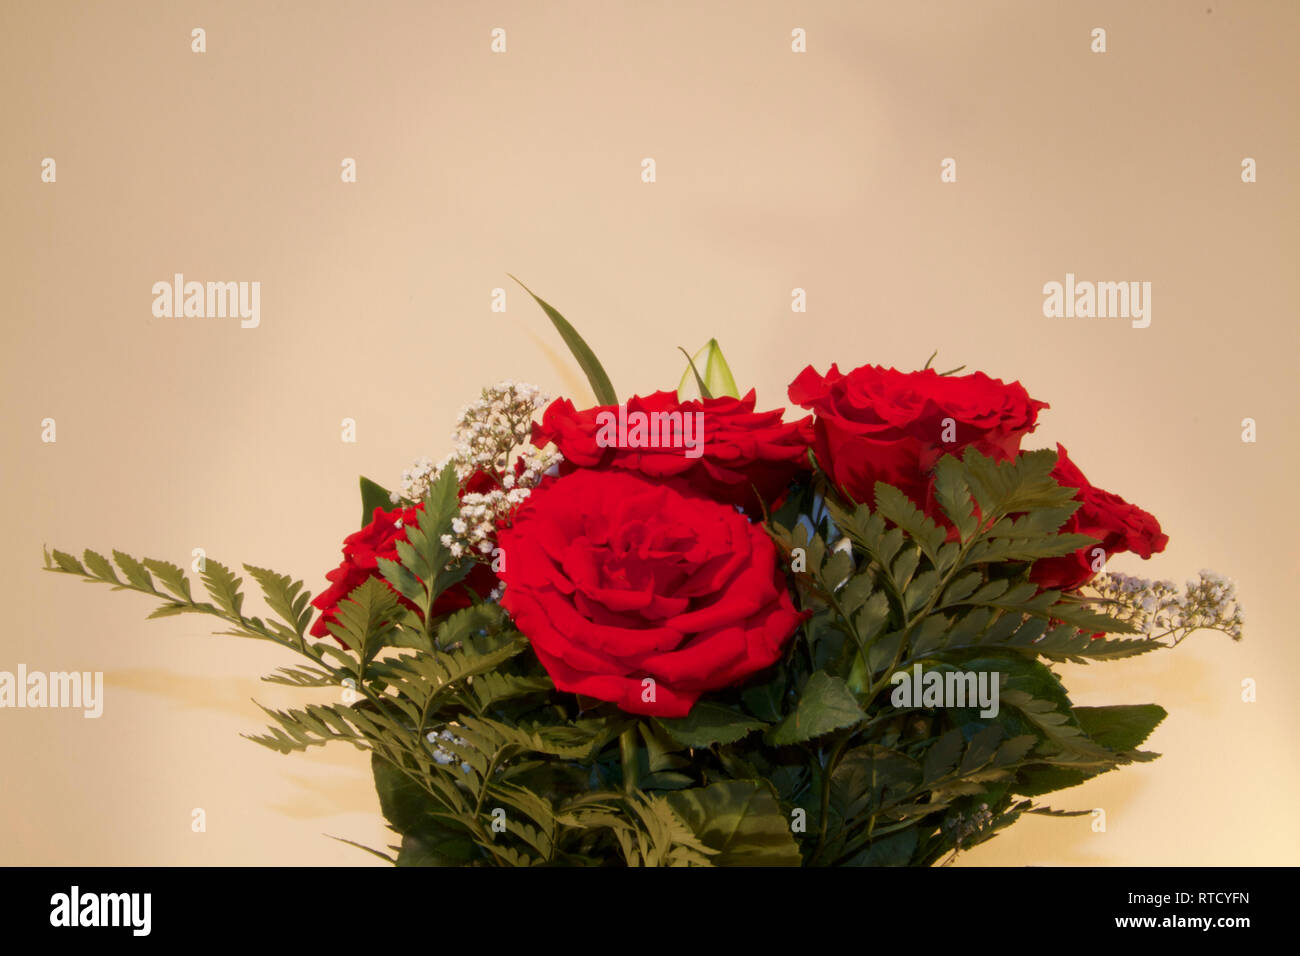 Dubai-Red roses in a glass watered flower vase 1 Stock Photo